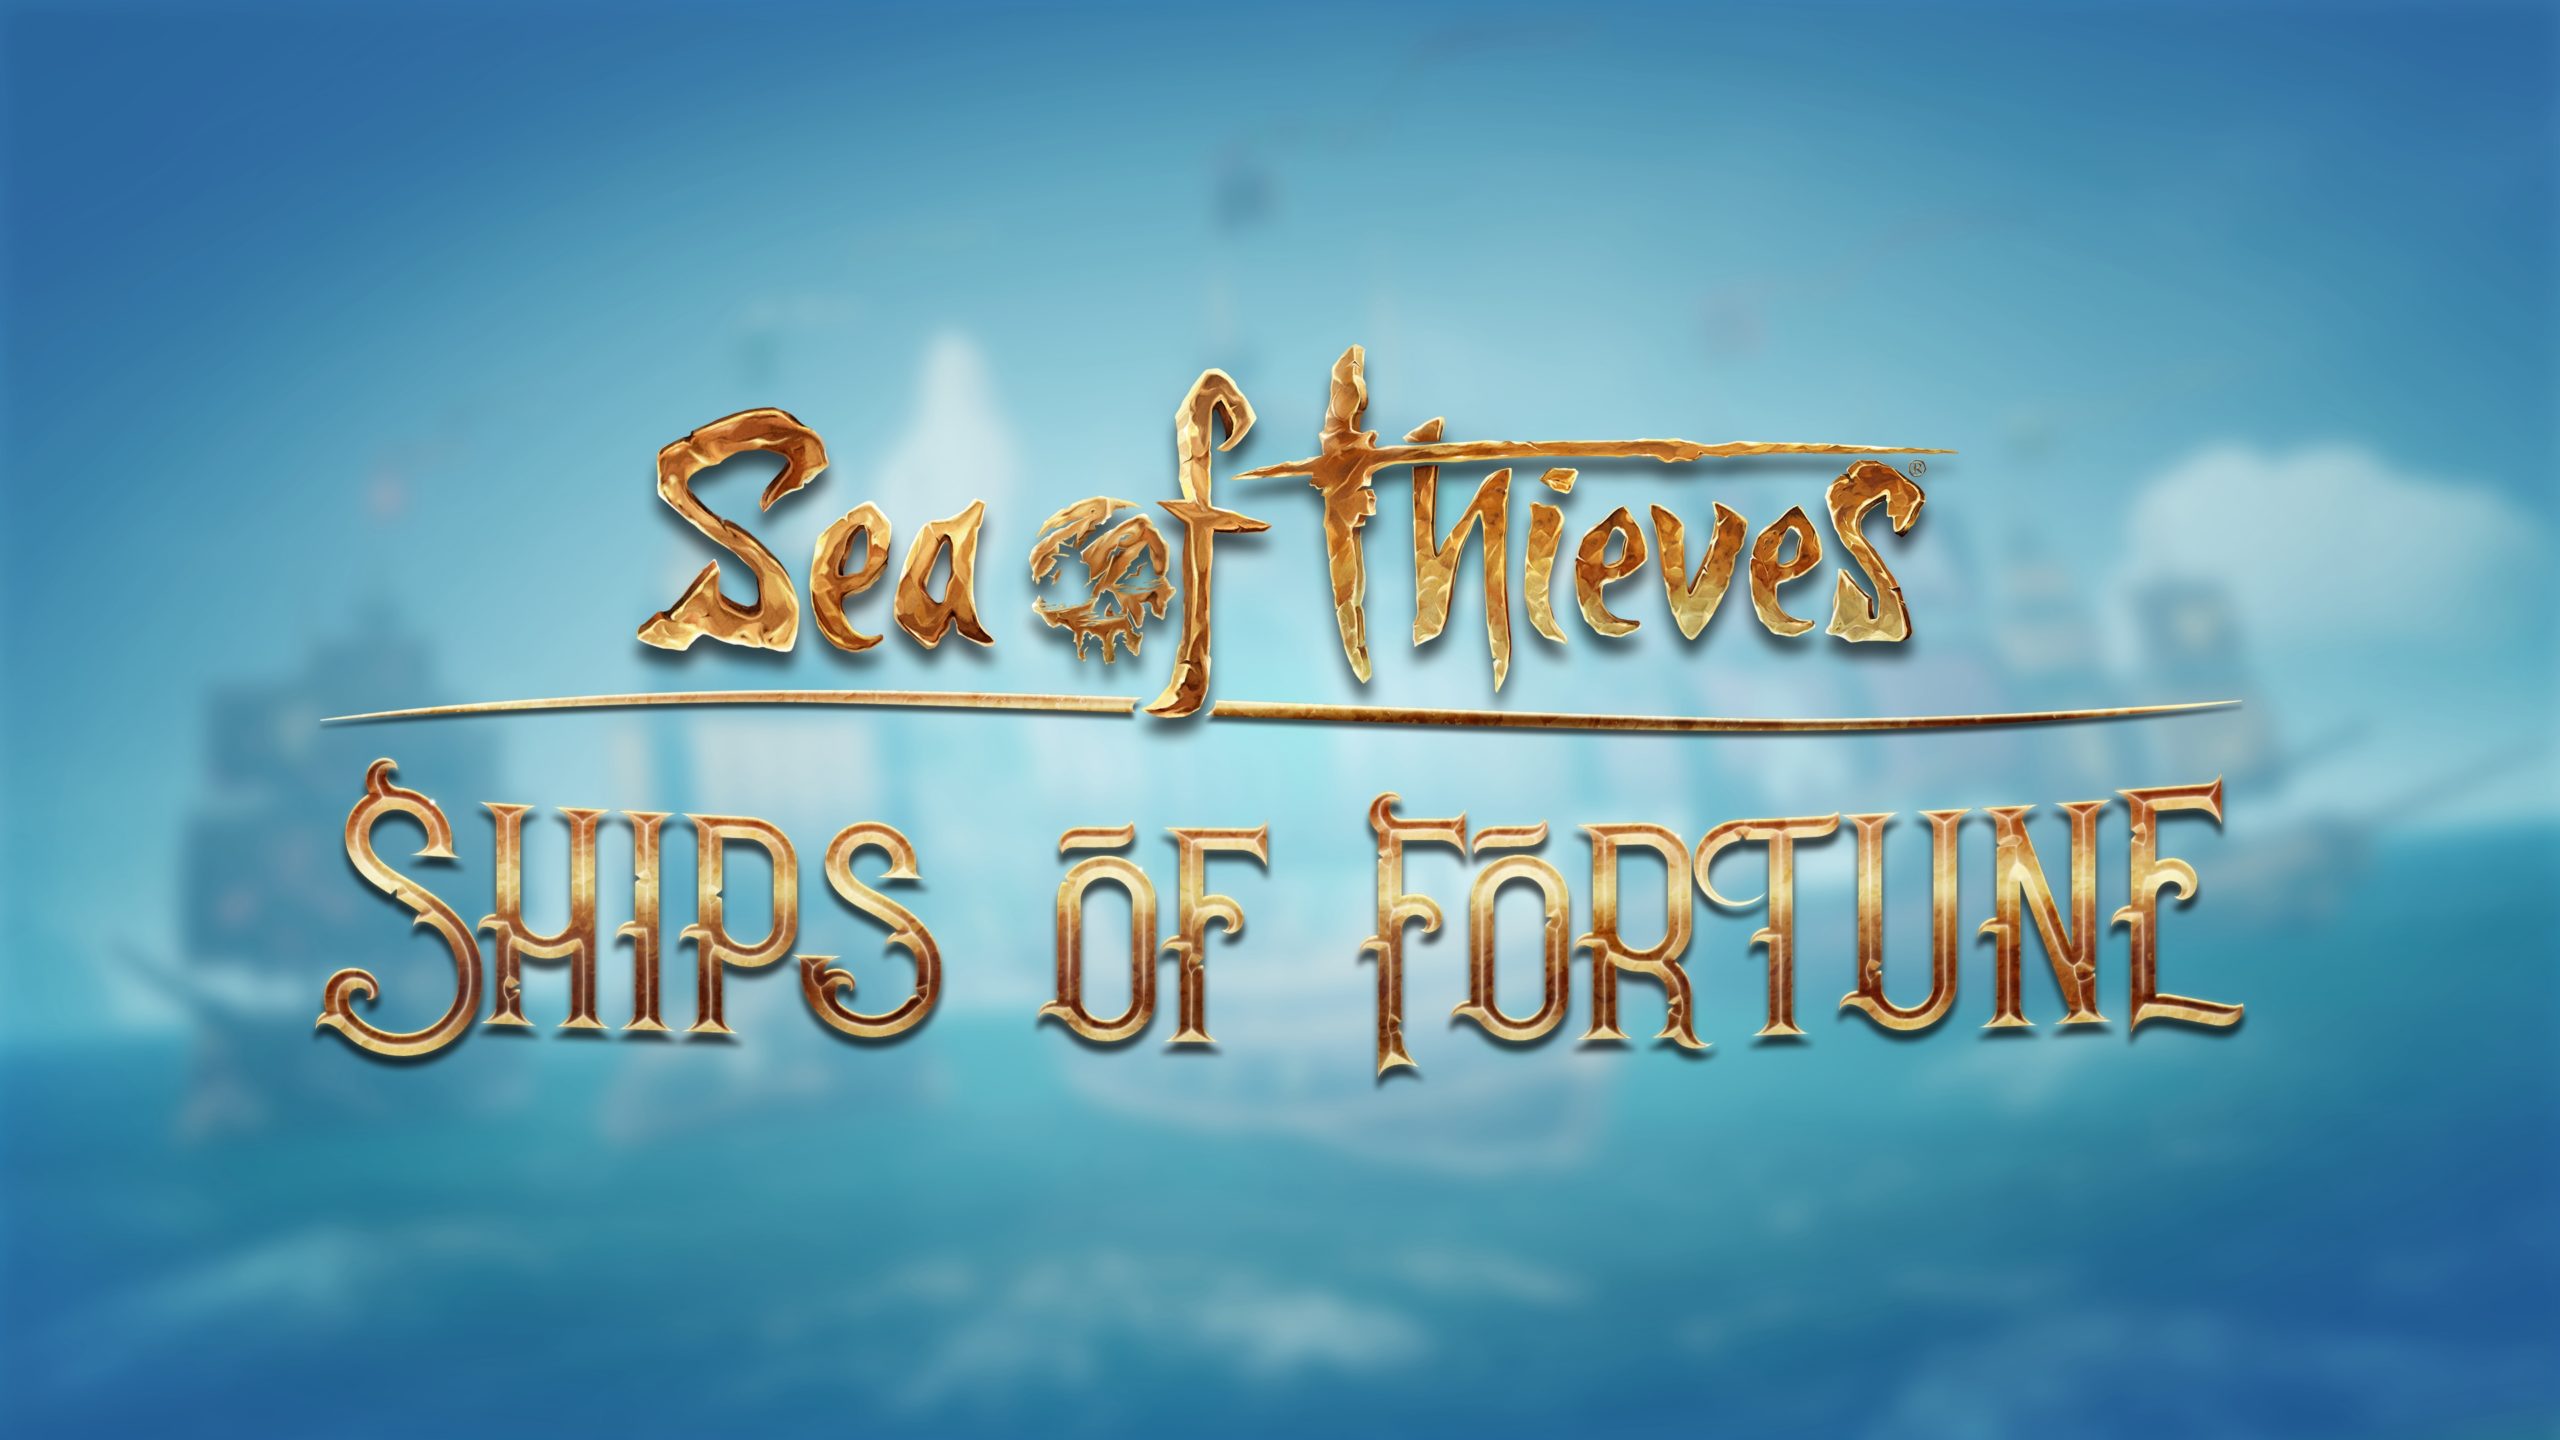 Sea-of-Thieves_Ships-of-Fortune